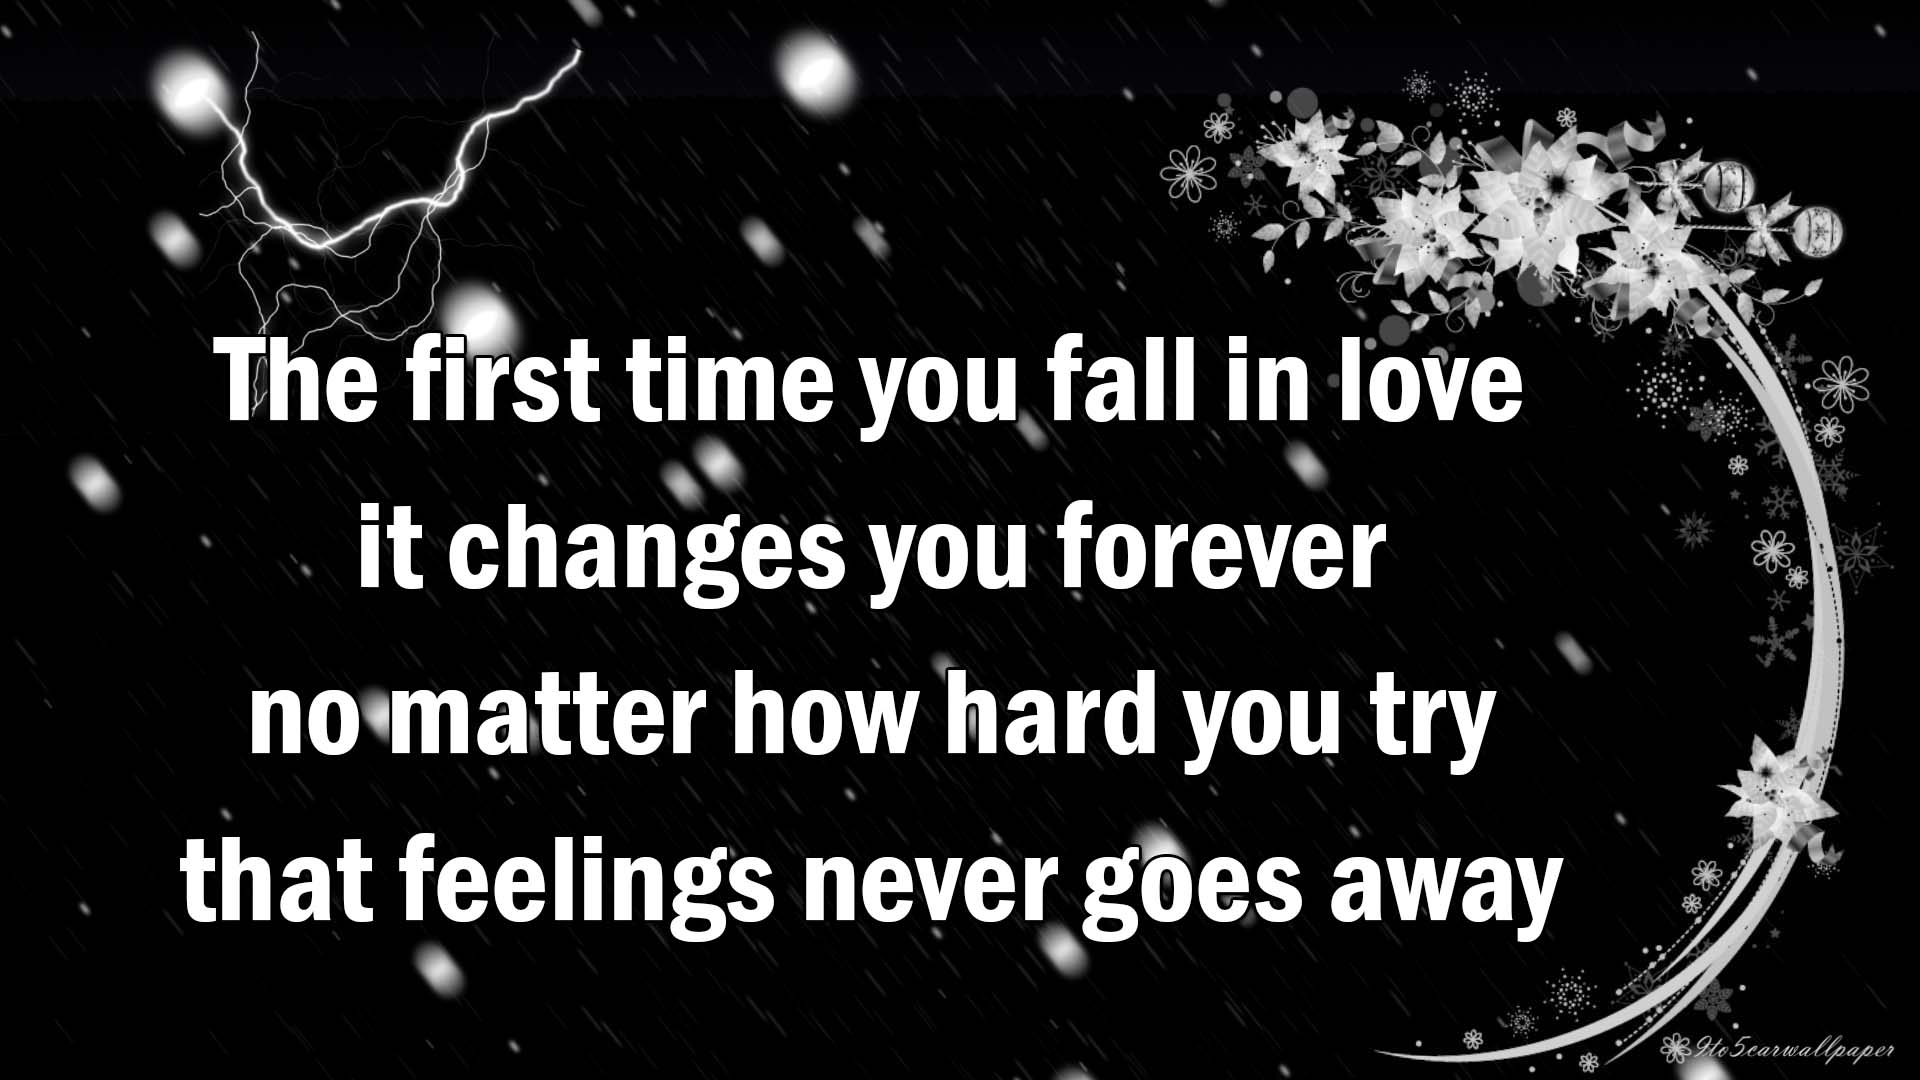 love-changes-you-forever-quotes-images-hd-wallpapers-2017